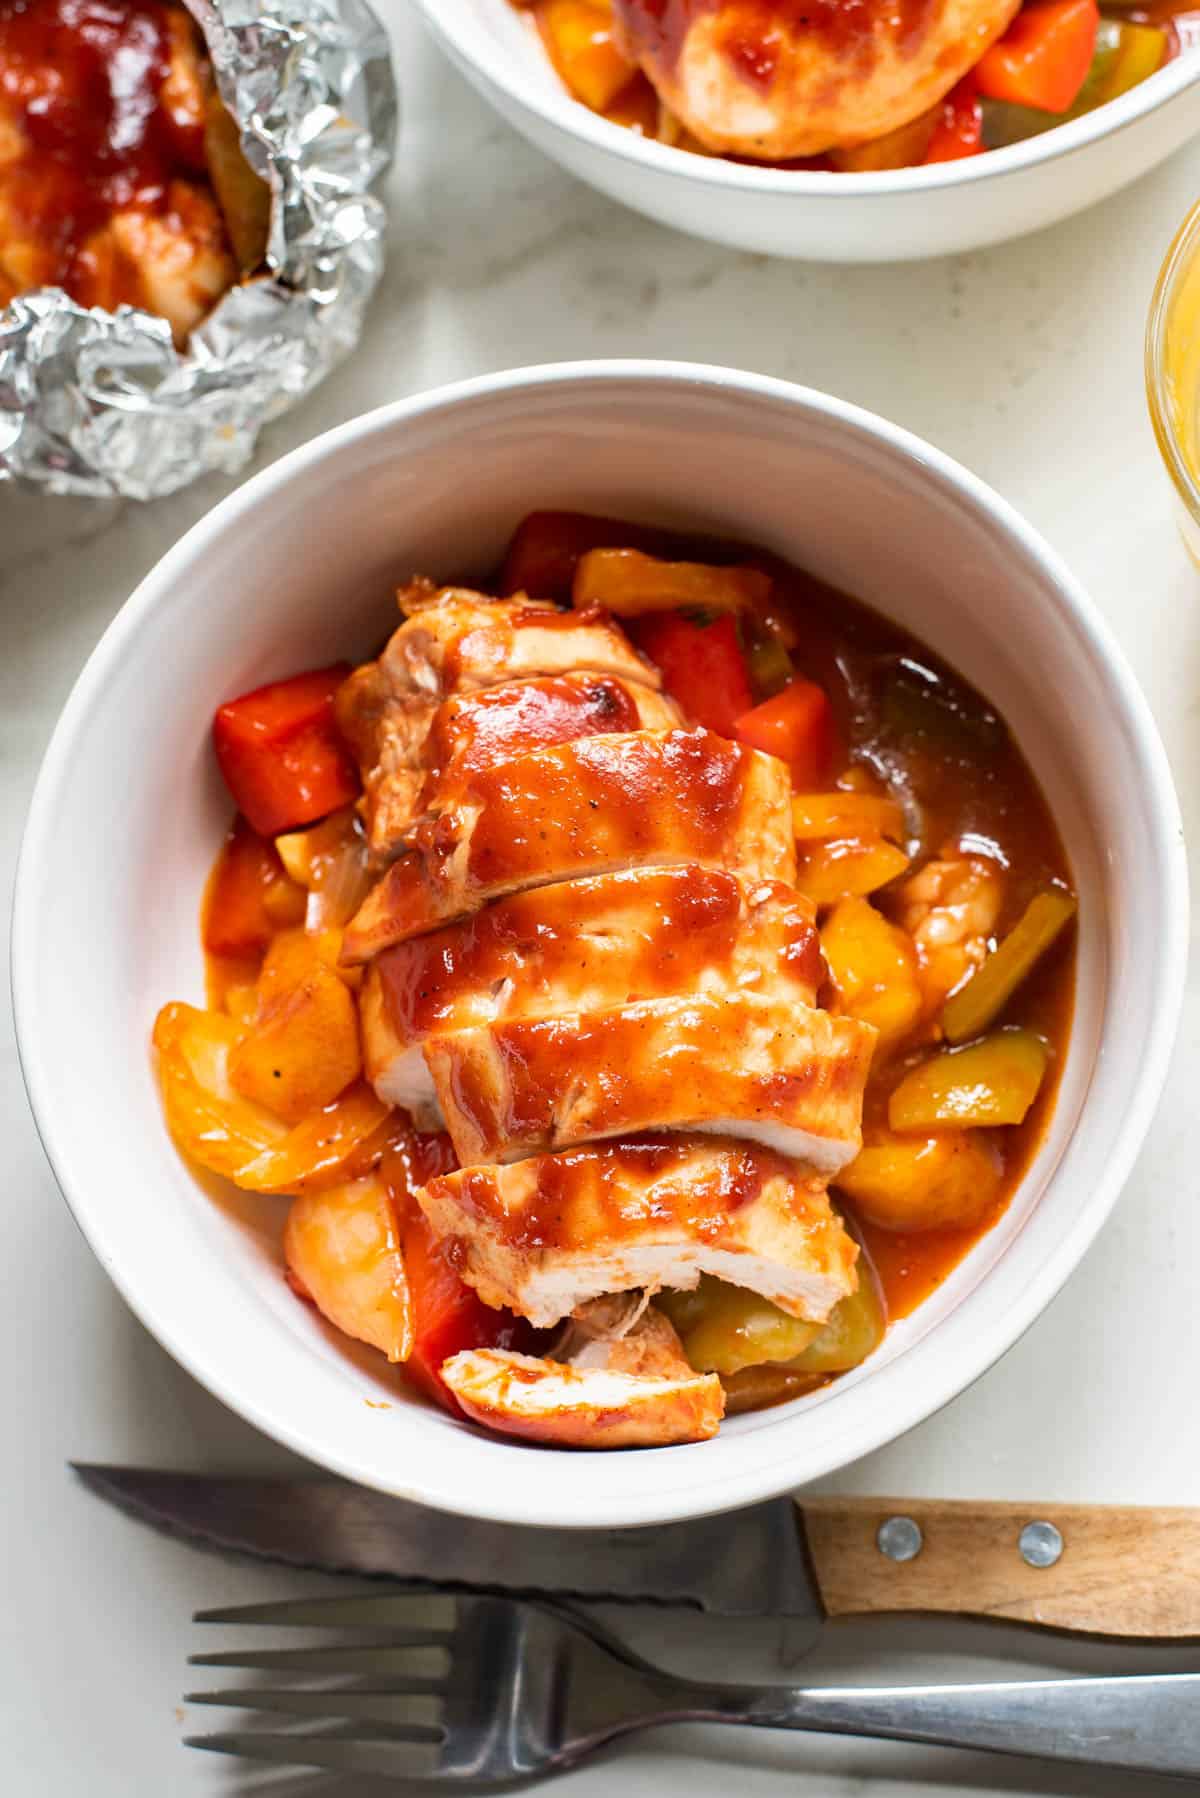 Sliced bbq chicken breast made in foil packets with pineapple and vegetables.